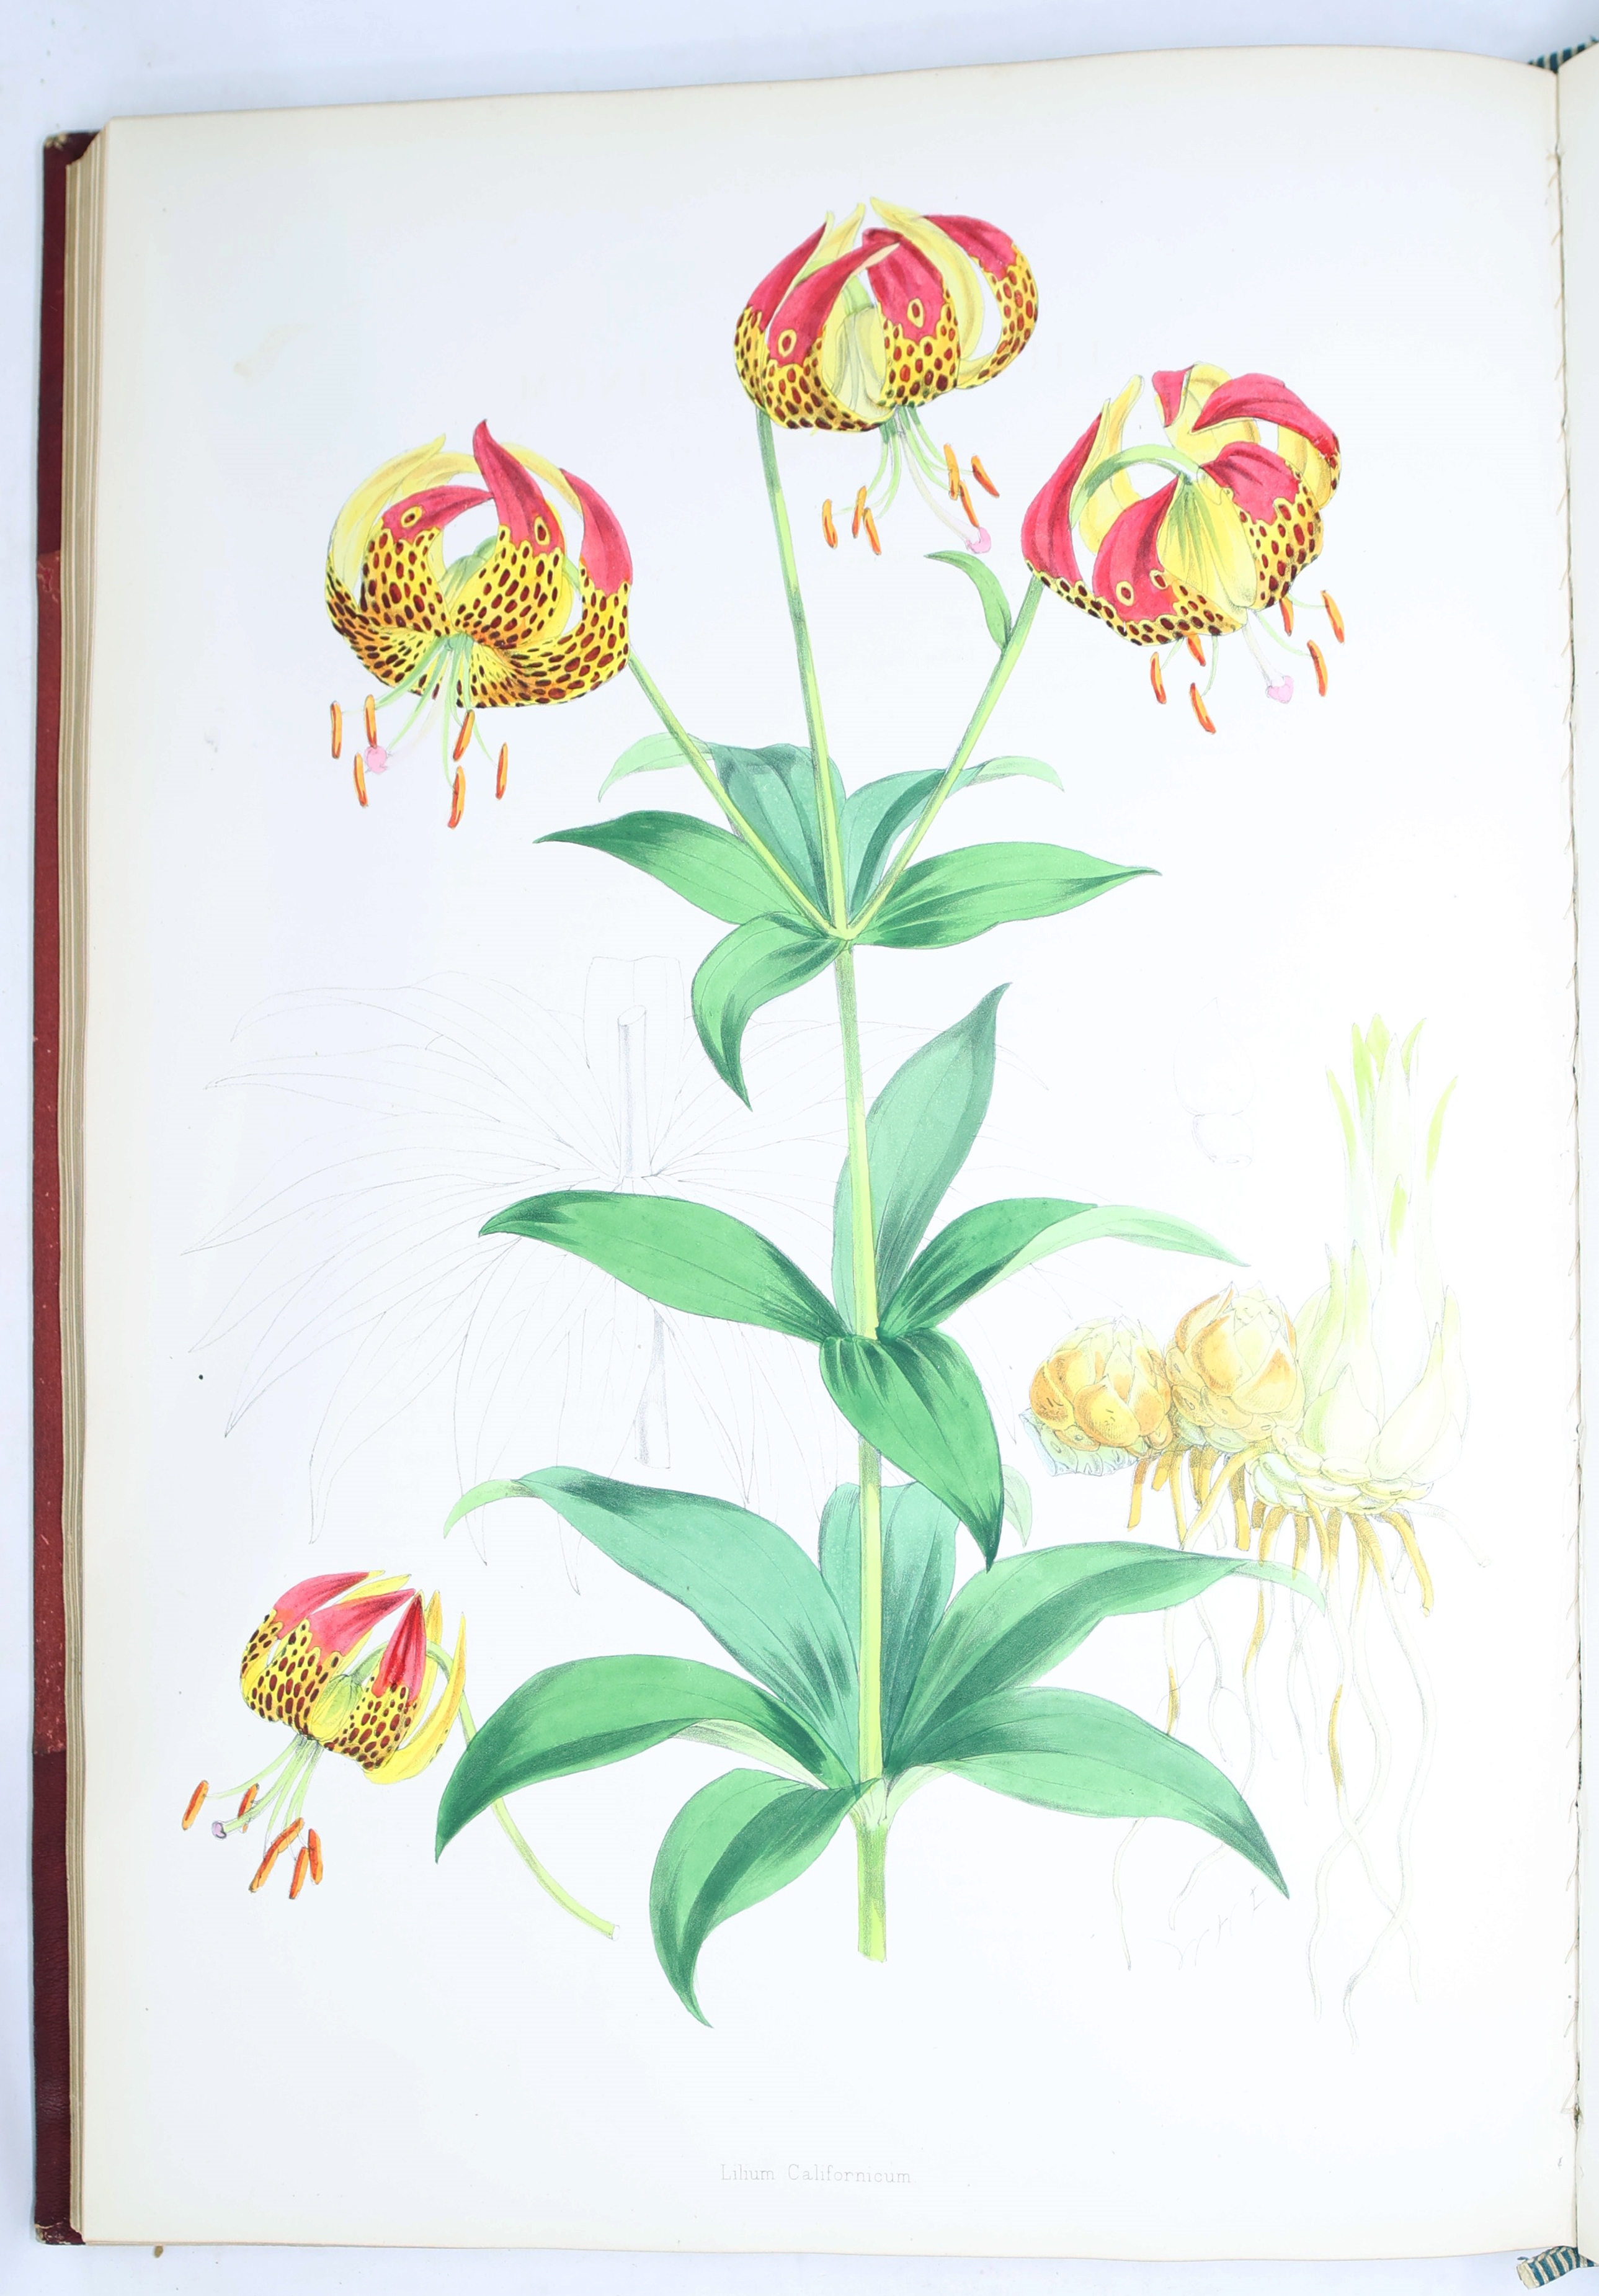 Artwork by Henry John Elwes, Elwes Monograph of the Genus Lilium with Supplement, First Edition, Made of mounted photograph